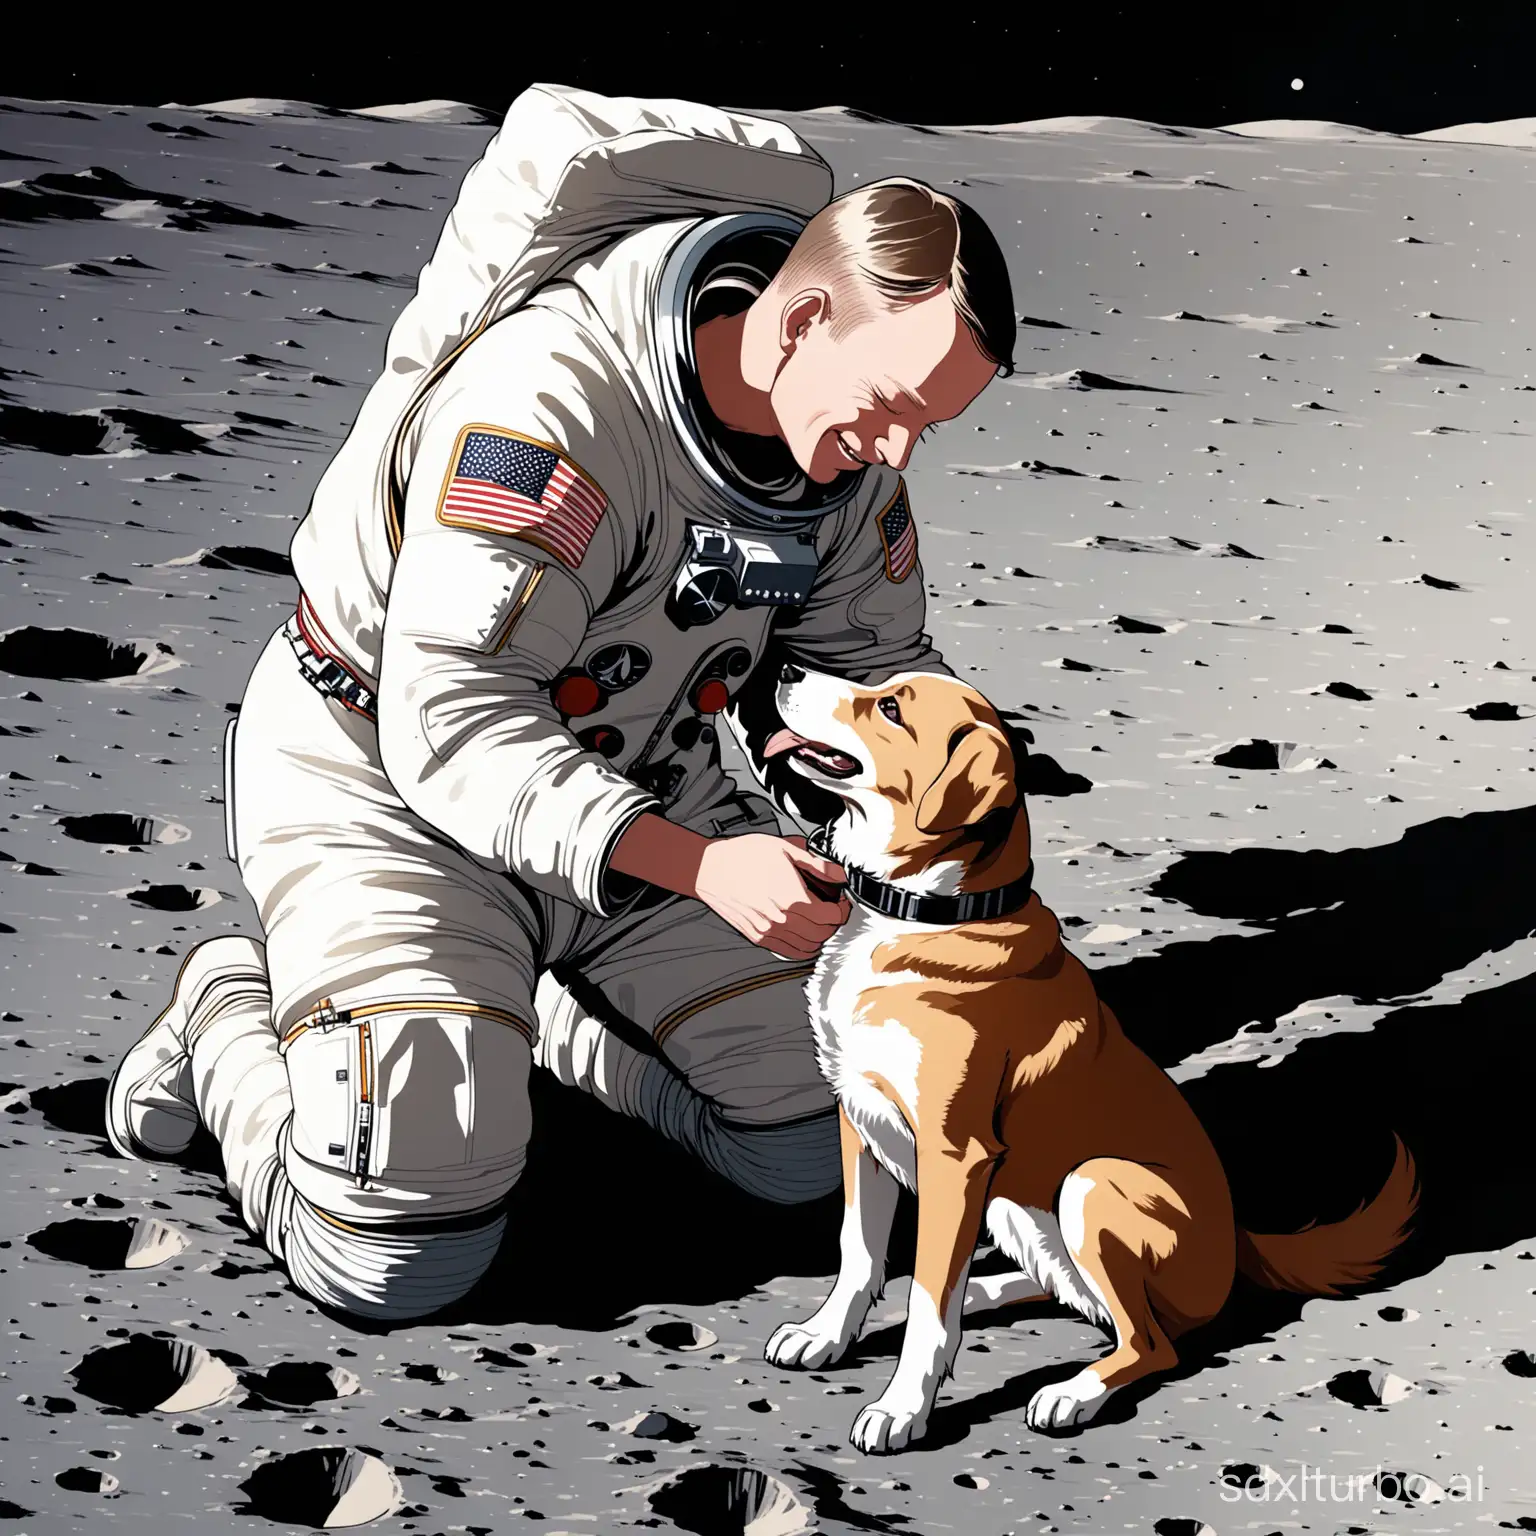 Neil Armstrong petting a dog at moon